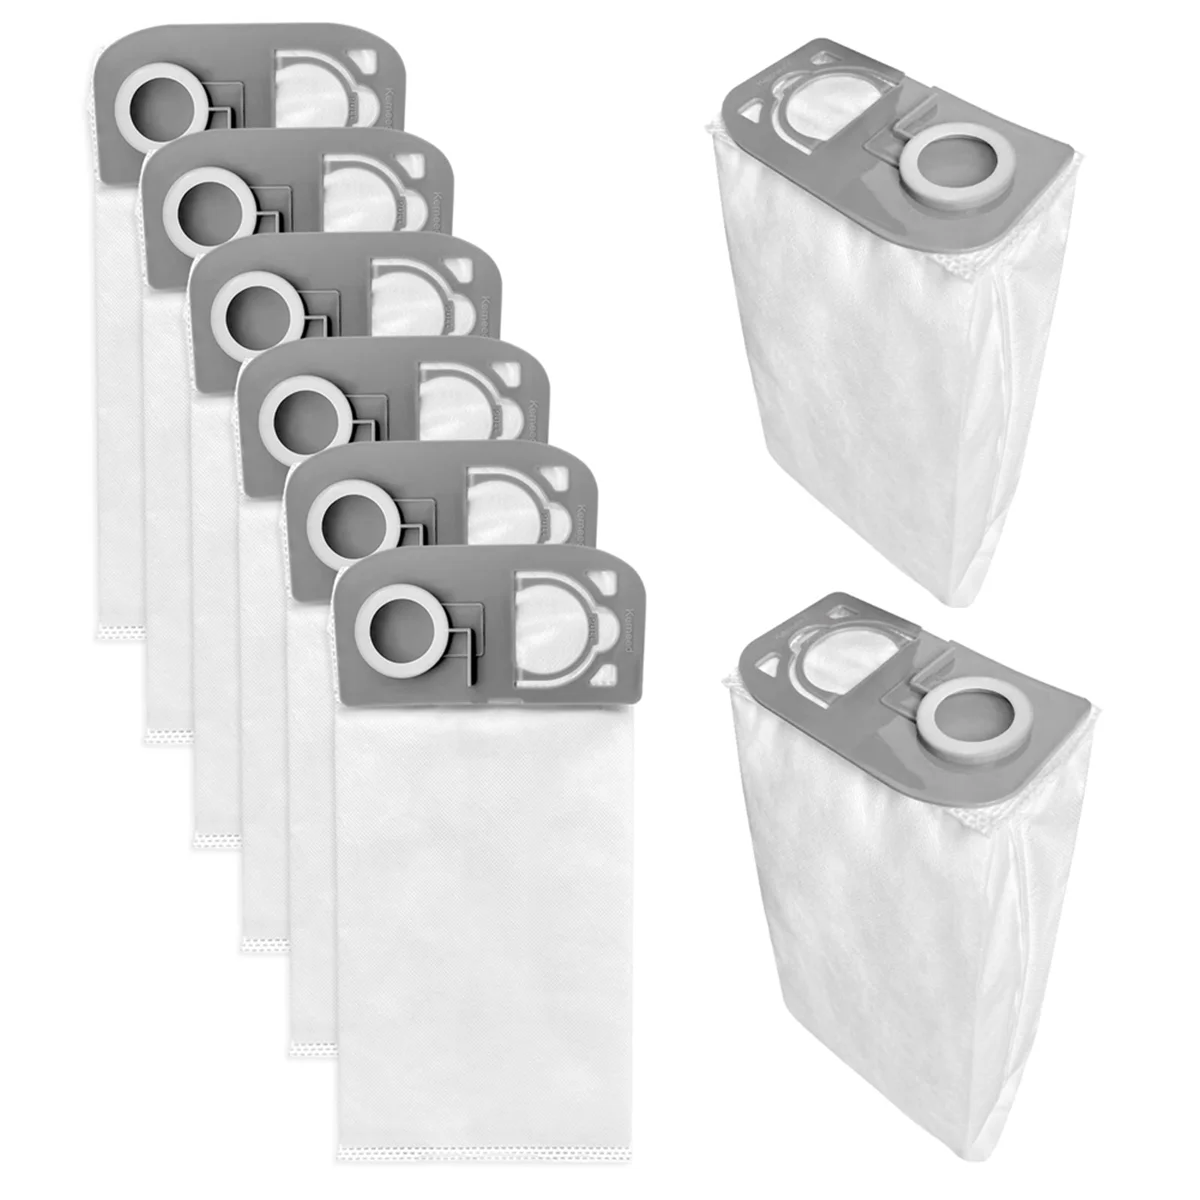 

8PCS Vacuum Replacement Dust Bags for Riccar R25 Series R25S, R25D, R25P Upright Vacuums Cleaner Filter, Part R25HC-6